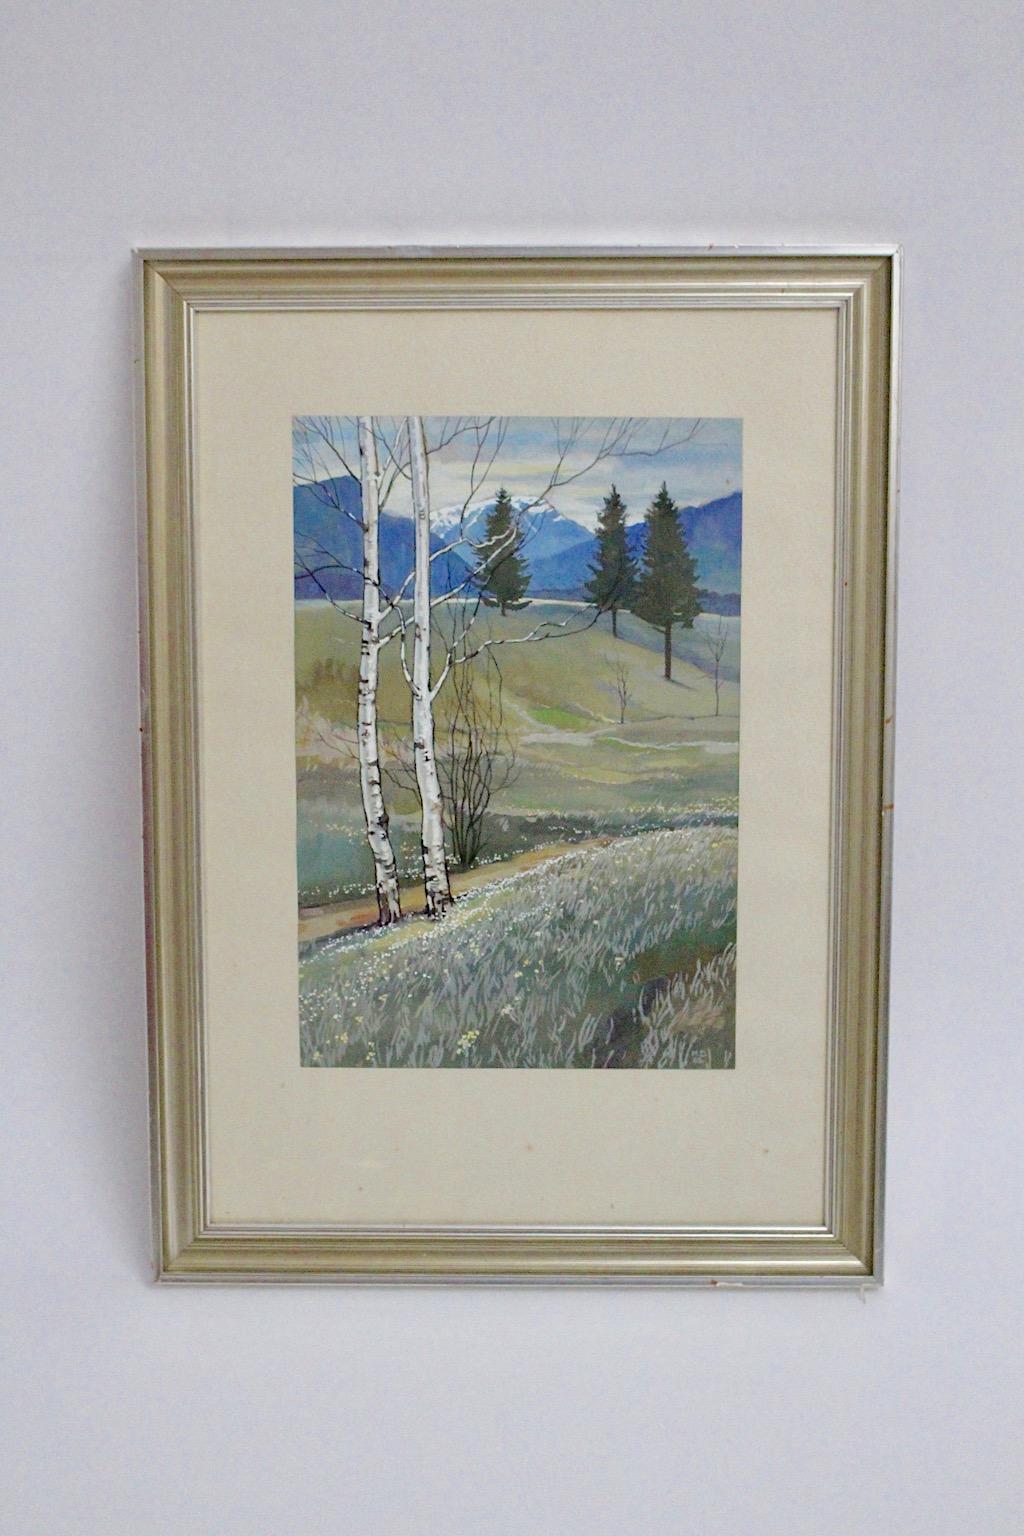 Mid-Century Modern vintage landscape painting with motif Schneeberg in Lower Austria in pastel tone color blue, grey, silver, green and white with watercolor on cardboard behind glass.
The painting is silver framed with an ivory colored passe -